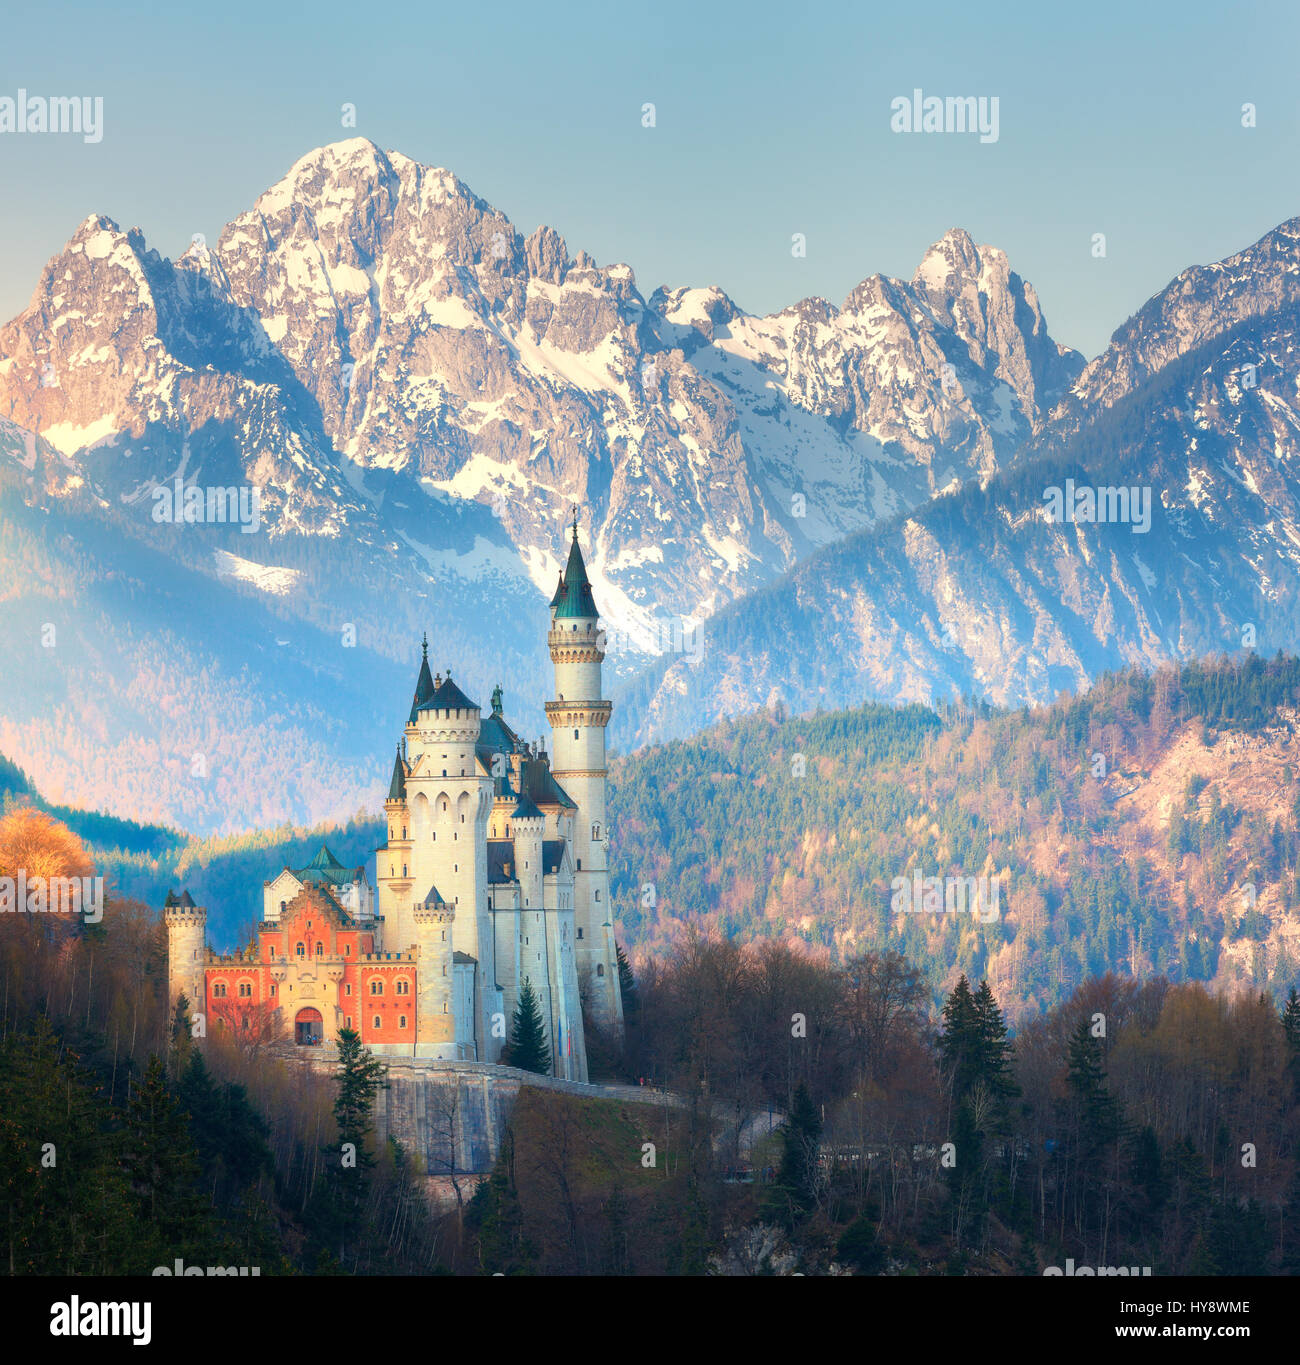 The famous Neuschwanstein Castle in the background of snowy mountains at sunrise in Germany. Beautiful spring landscape with castle, mountain peaks an Stock Photo